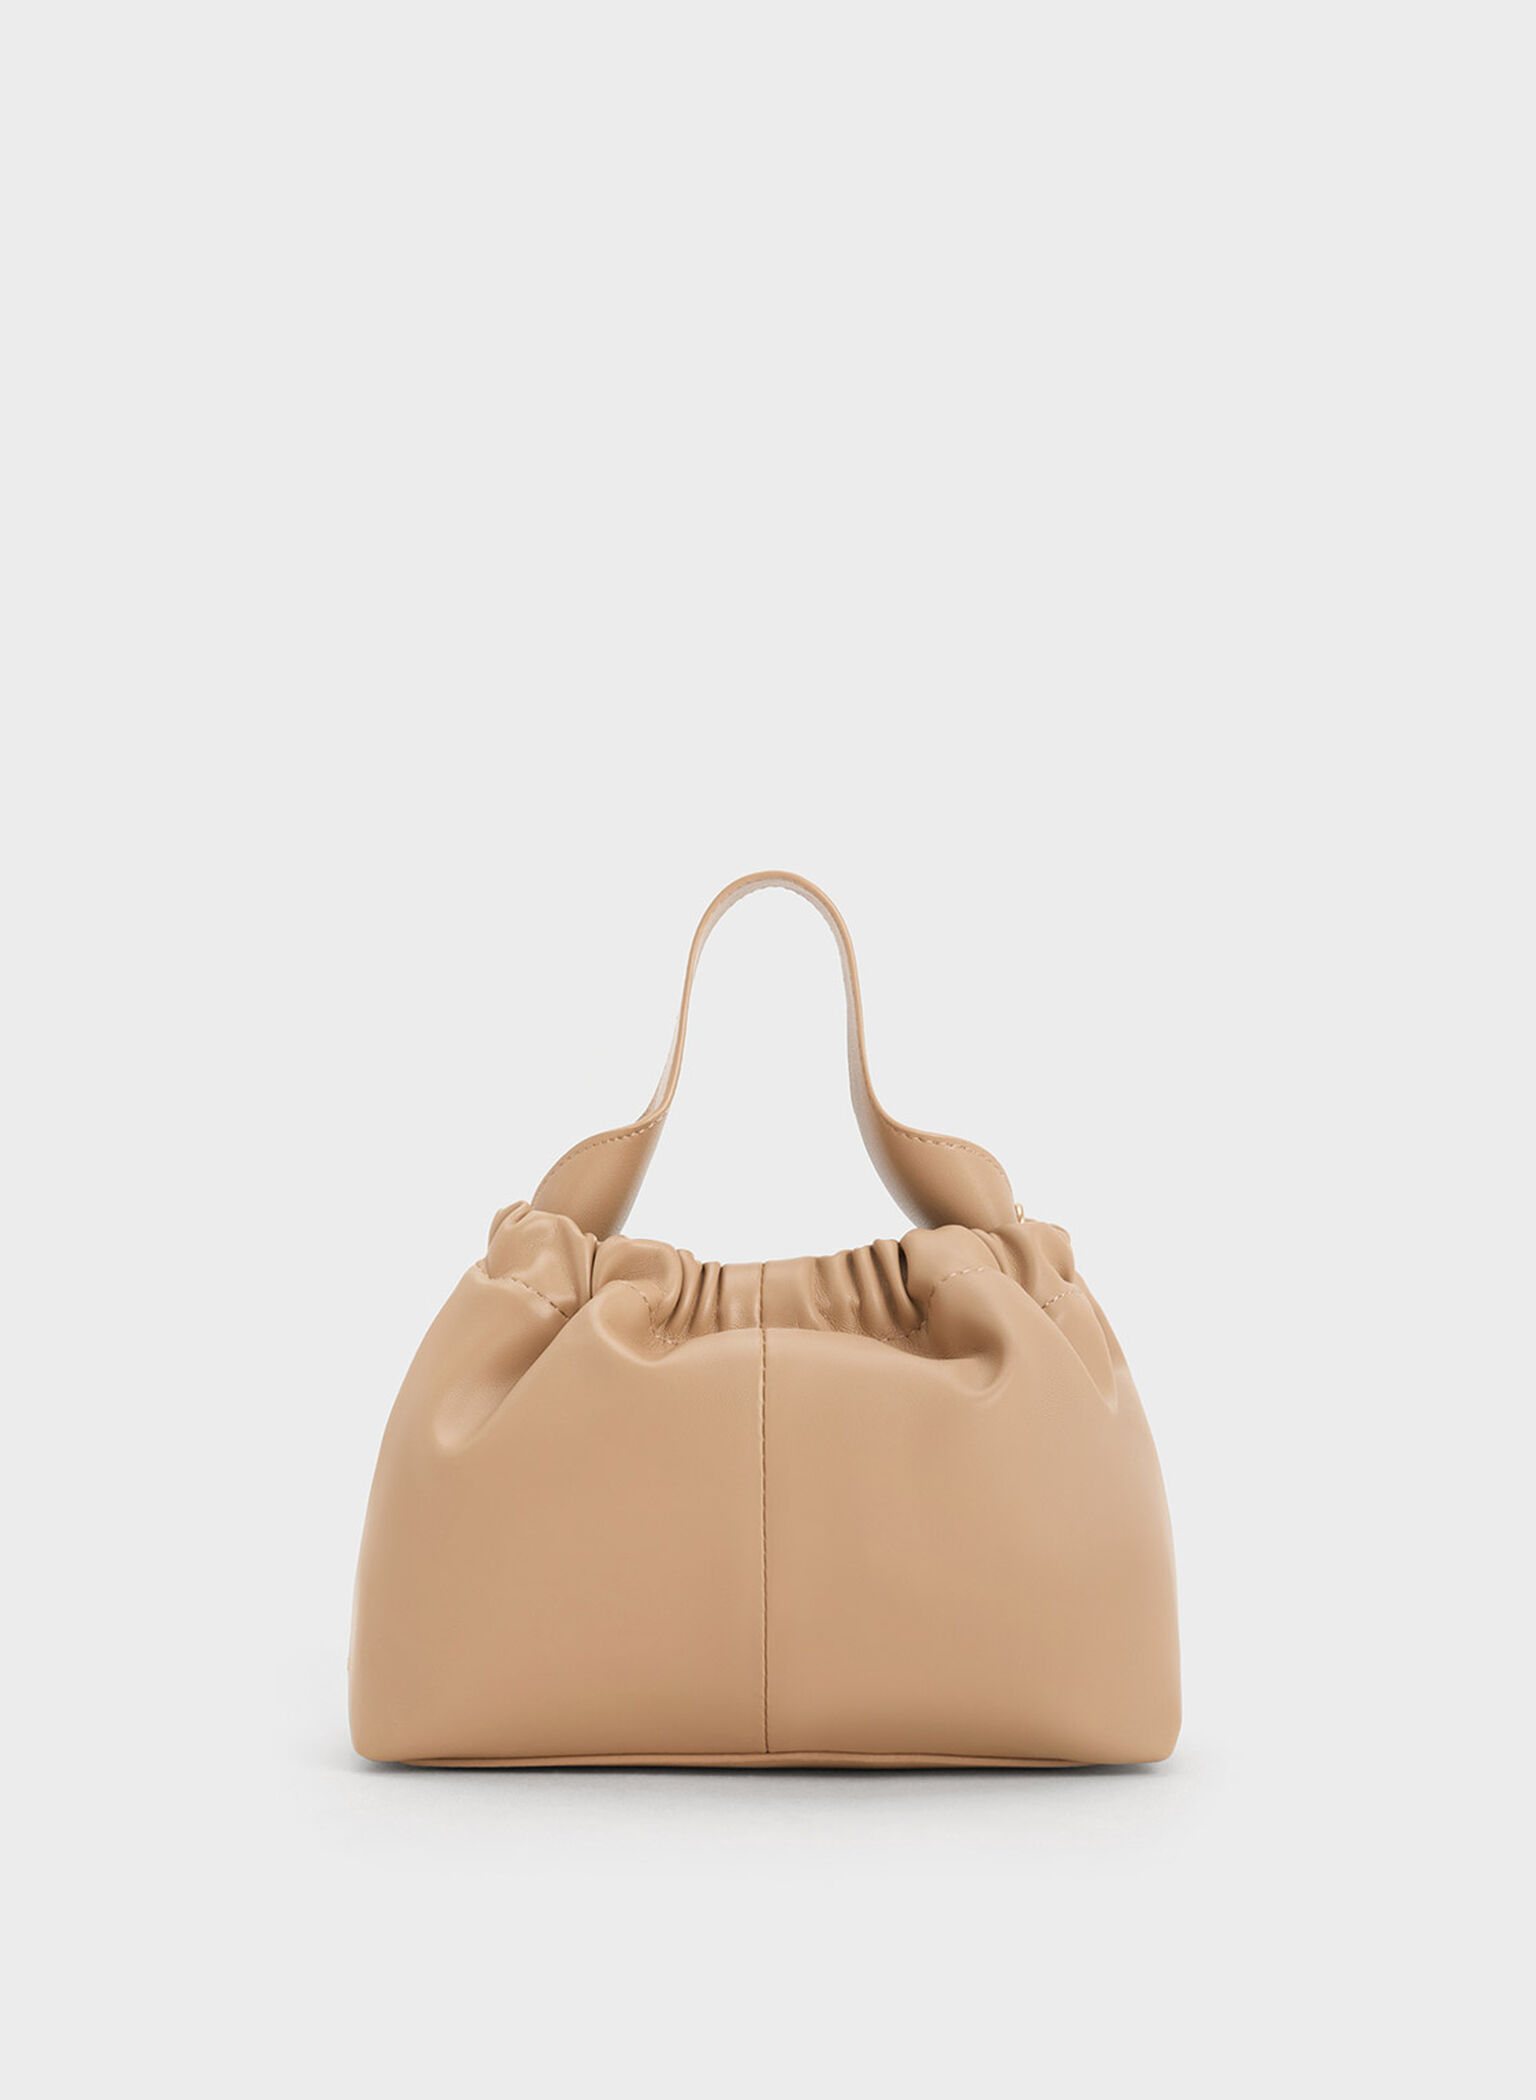 Charles & Keith - Women's Ally Ruched Slouchy Chain-Handle Bag, Sand, S